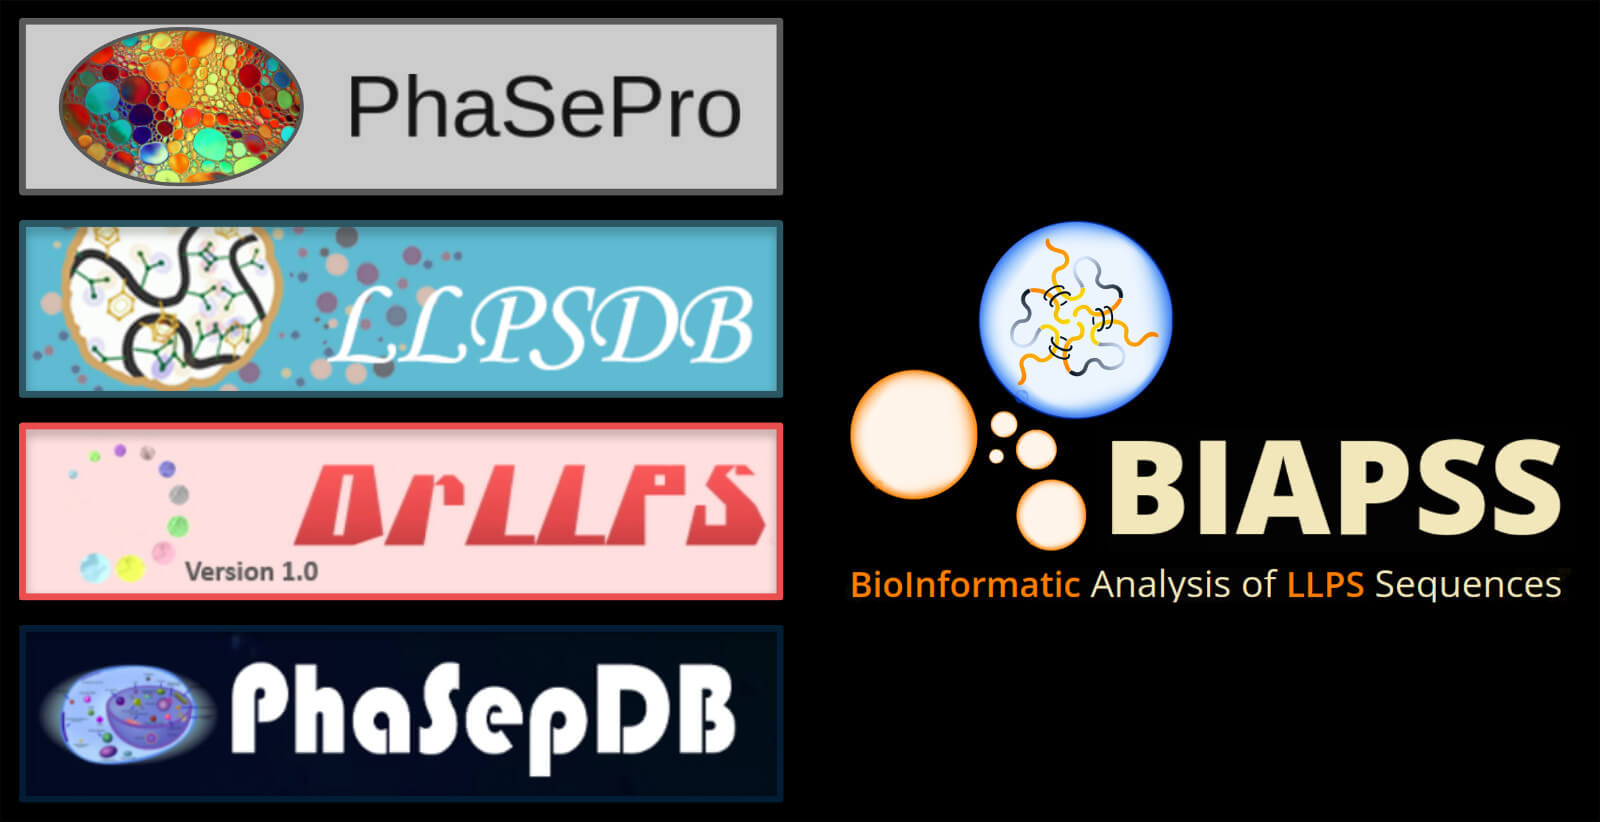 BIAPSS database contains a superset of 501 unique, experimentally evidenced LLPS sequences.